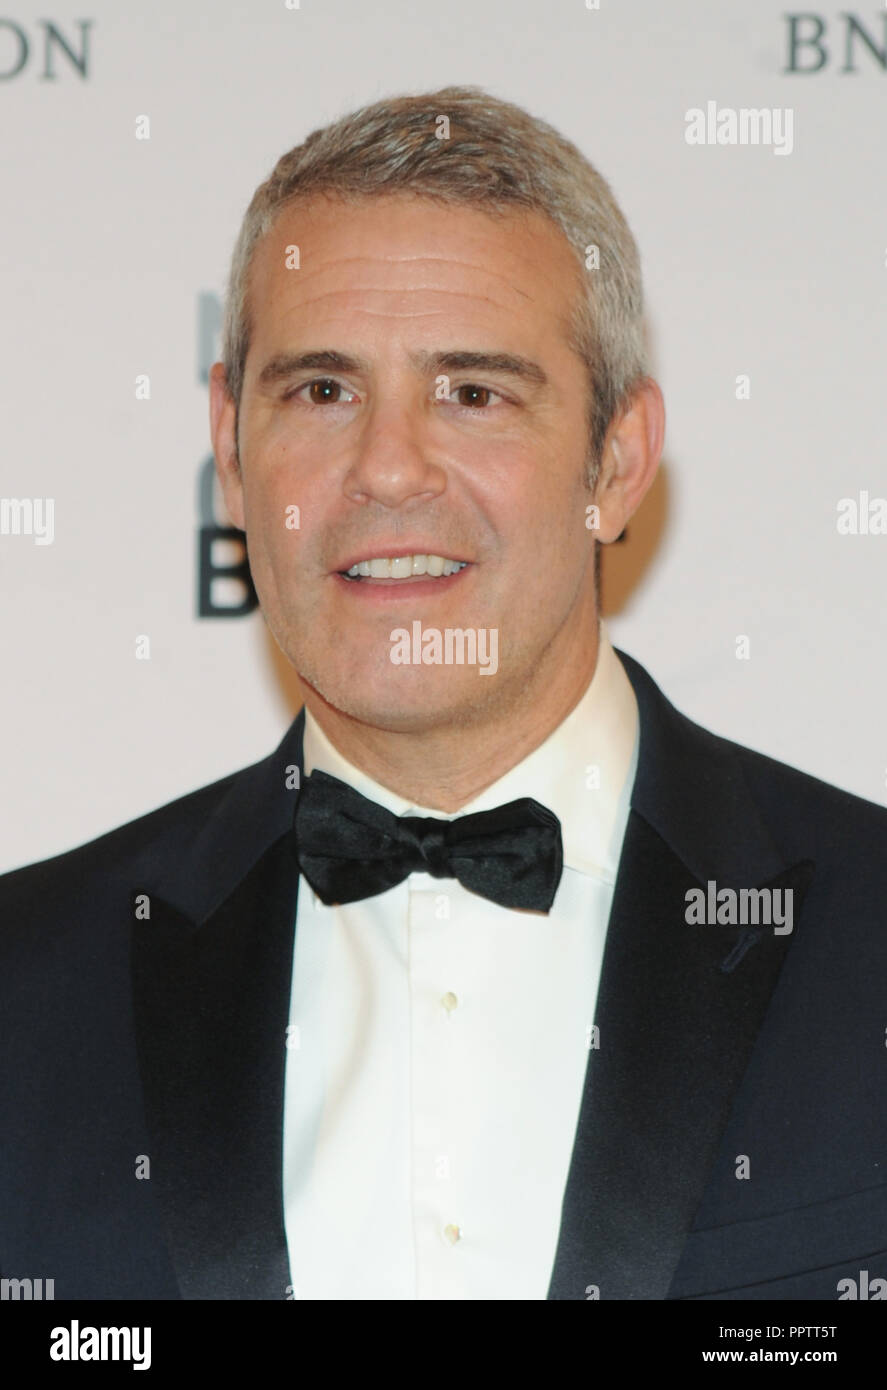 New York, NY, USA. 27th Sep, 2018. Andy Cohen attends the New York City Ballet 2018 Fall Fashion Gala at David H. Koch Theater at Lincoln Center on September 27, 2018 in New York City. Credit: John Palmer/Media Punch/Alamy Live News Stock Photo